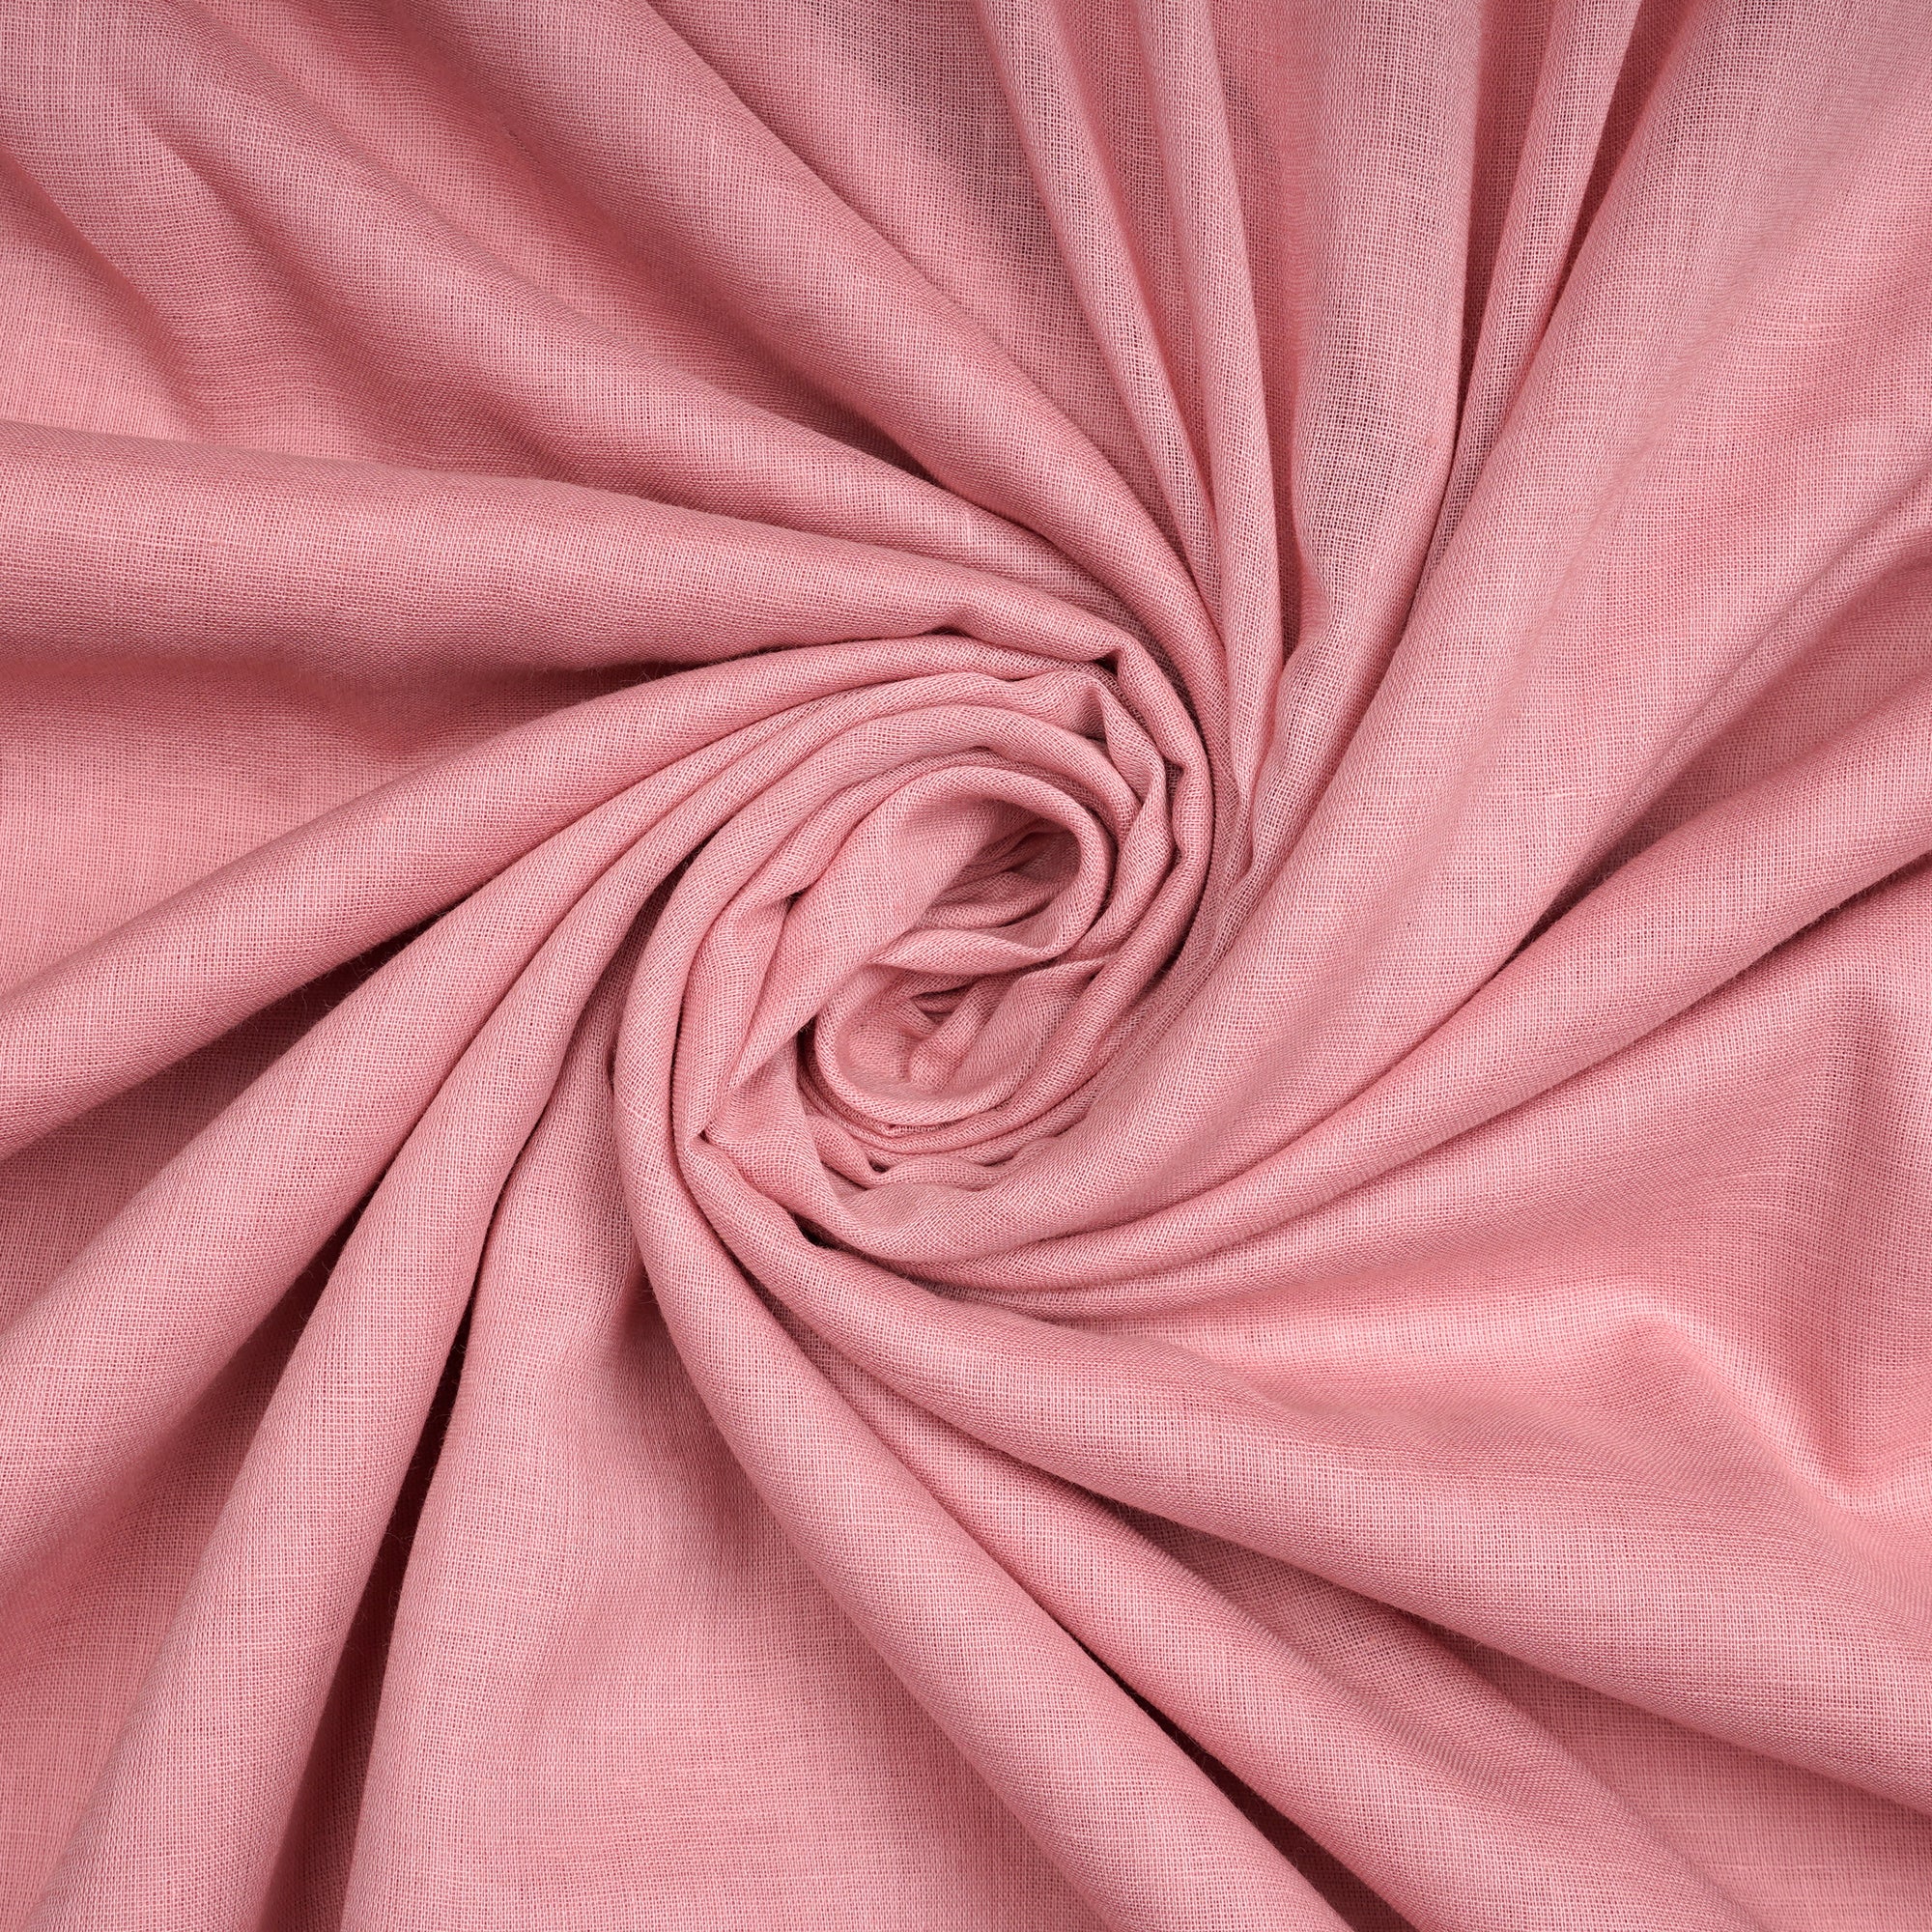 Blush Pink Piece Dyed Fine Cotton Voile Fabric